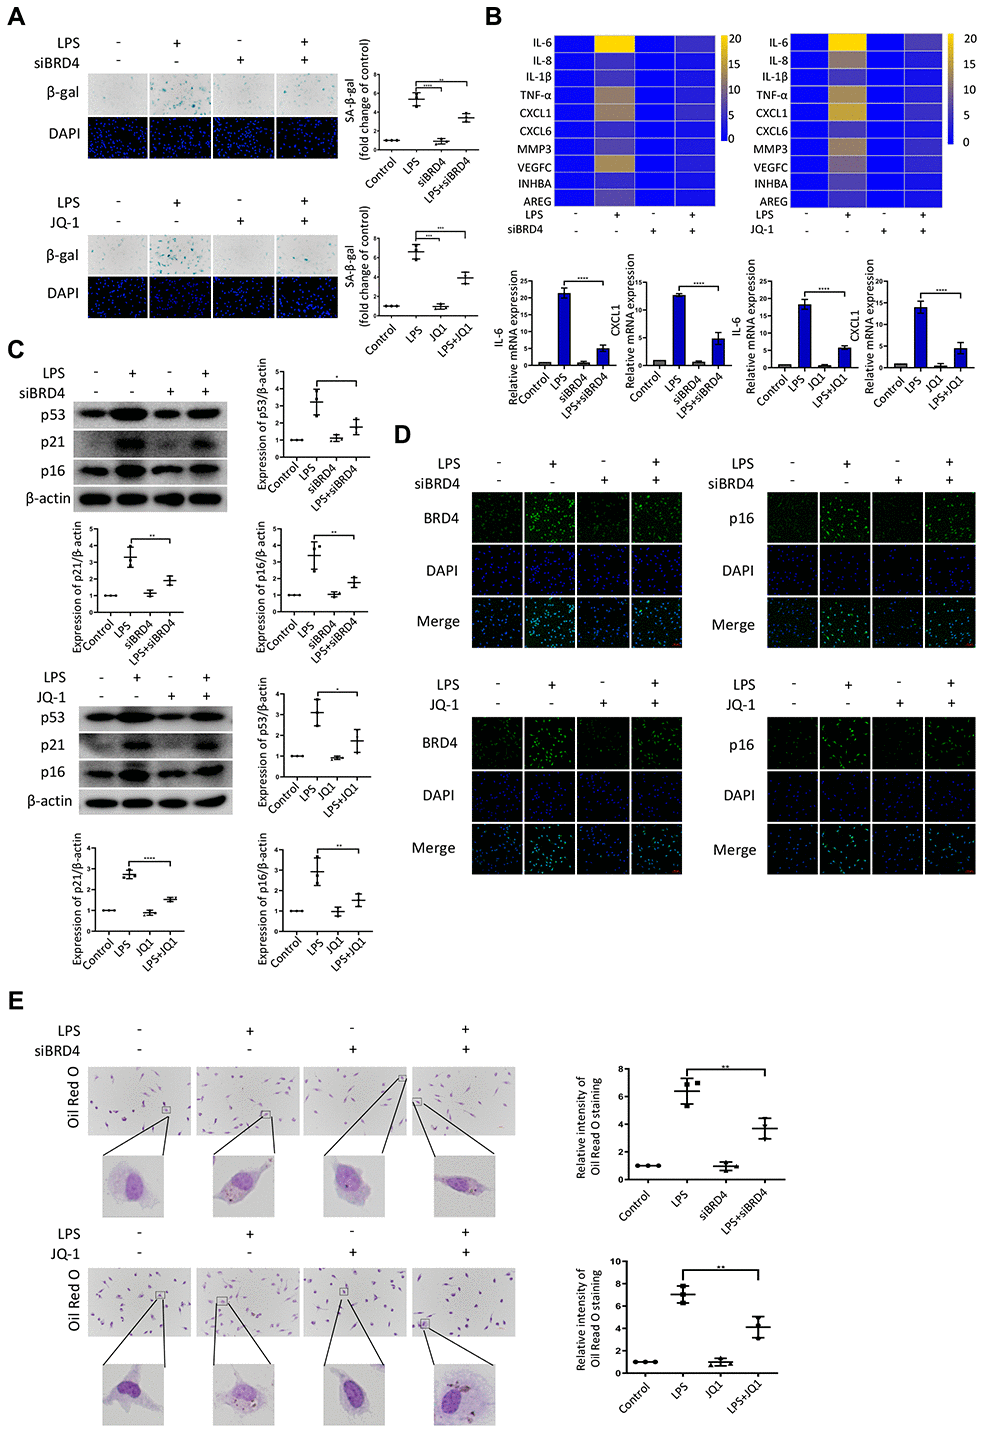 BRD4 is indispensable for LPS-induced peritoneal macrophage senescence in mice. Peritoneal macrophages from wild type mice were treated with BRD4-specific siRNA or the BRD4 inhibitor JQ-1 for 24 h, followed by LPS stimulation for 24 h. (A) Representative SA-β-gal and DAPI counterstaining of peritoneal macrophages from C57BL6 mice and quantitative analysis of positive cells. Scale bar, 50 μm. (B) Cluster heatmaps of SASP transcription levels and scatter plots of representative differentially expressed IL-6 and CXCL1 by qRT-PCR analysis. (C) Western blot analysis and quantification of the expression of the senescence-related markers p53, p21, and p16. (D) Immunofluorescence measurements of BRD4 and p16 examined by confocal microscopy. Scale bar, 50 μm. (E) The lipid accumulation was measured by representative Oil Red O staining. The number of positive results was counted. The data all represent measurement data presented as the mean ± SD. Statistical analysis was performed for the comparison of multiple groups using one-way ANOVA, followed by Tukey’s post-hoc test. The experiment was repeated three times. *p p p p 